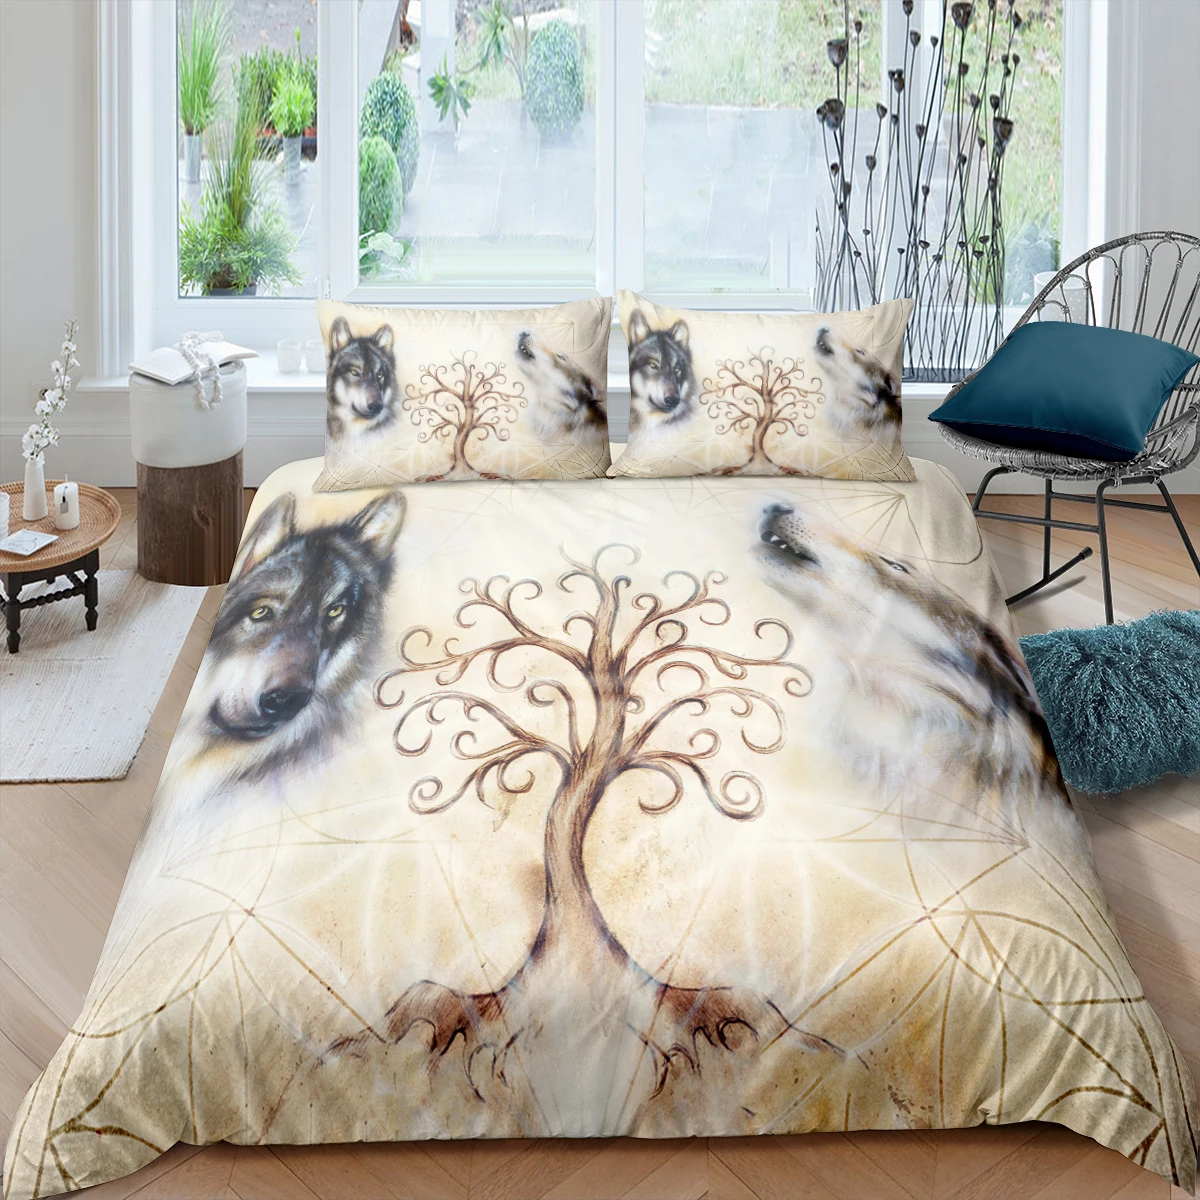 

Duvet Cover Set Home Textile Decor Cool Wolf Bedding Set Animal Fashoin 3D Print Comforter Luxury Twin Queen King Single Size